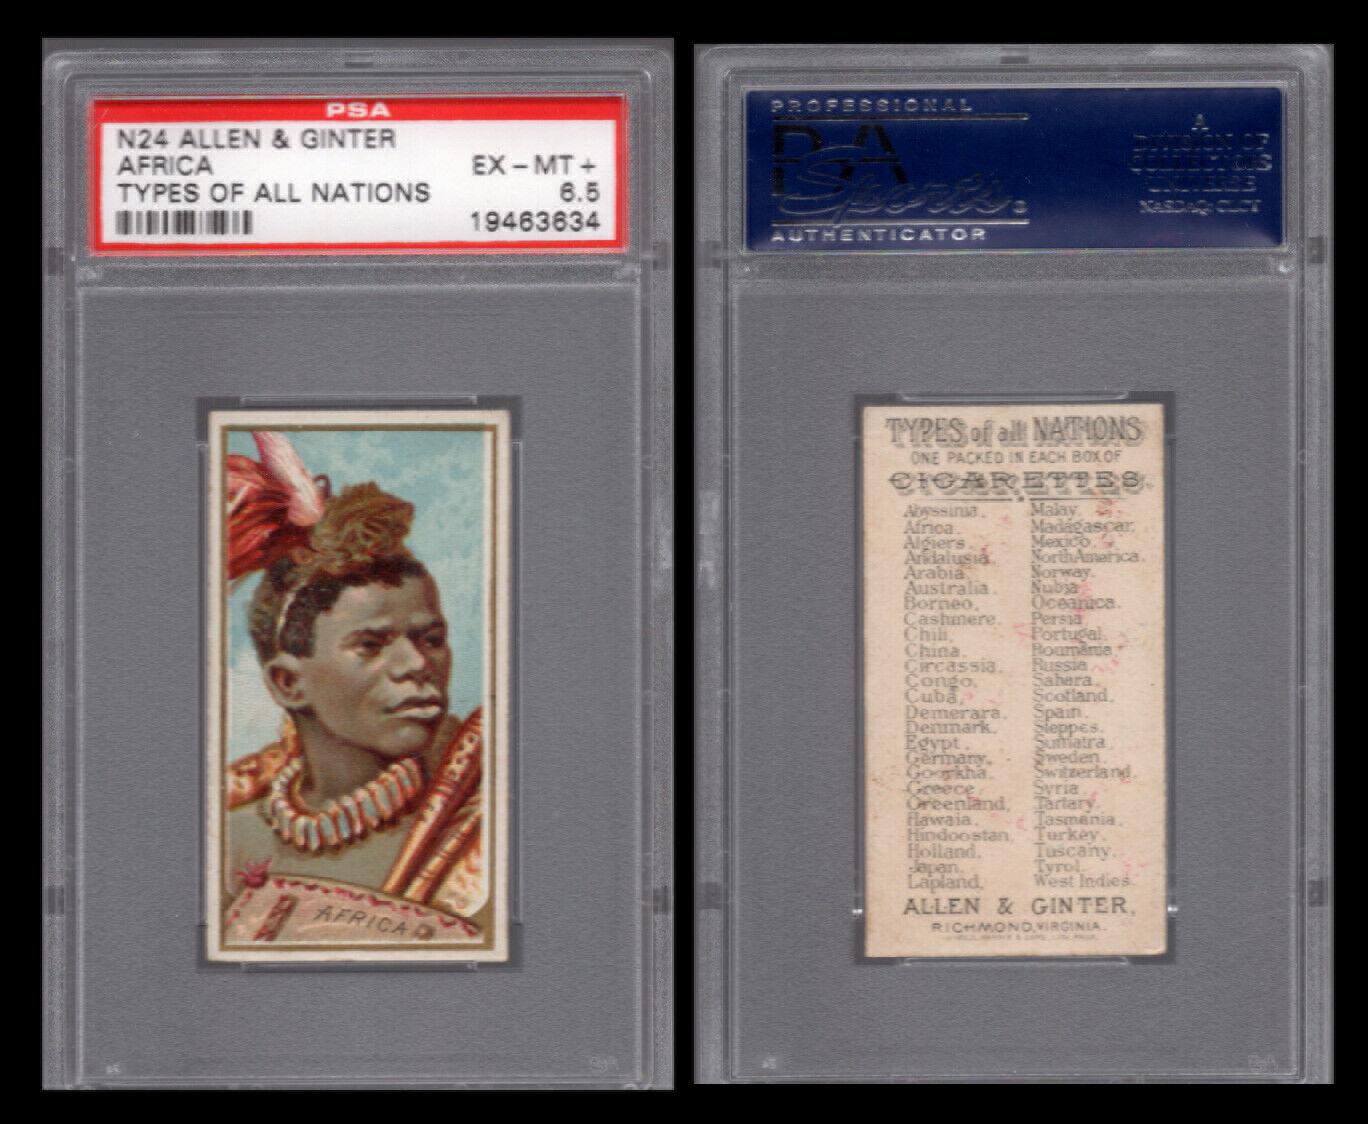 1889 N24 ALLEN & GINTER TYPES OF ALL NATIONS AFRICA PSA 6.5 ,,2